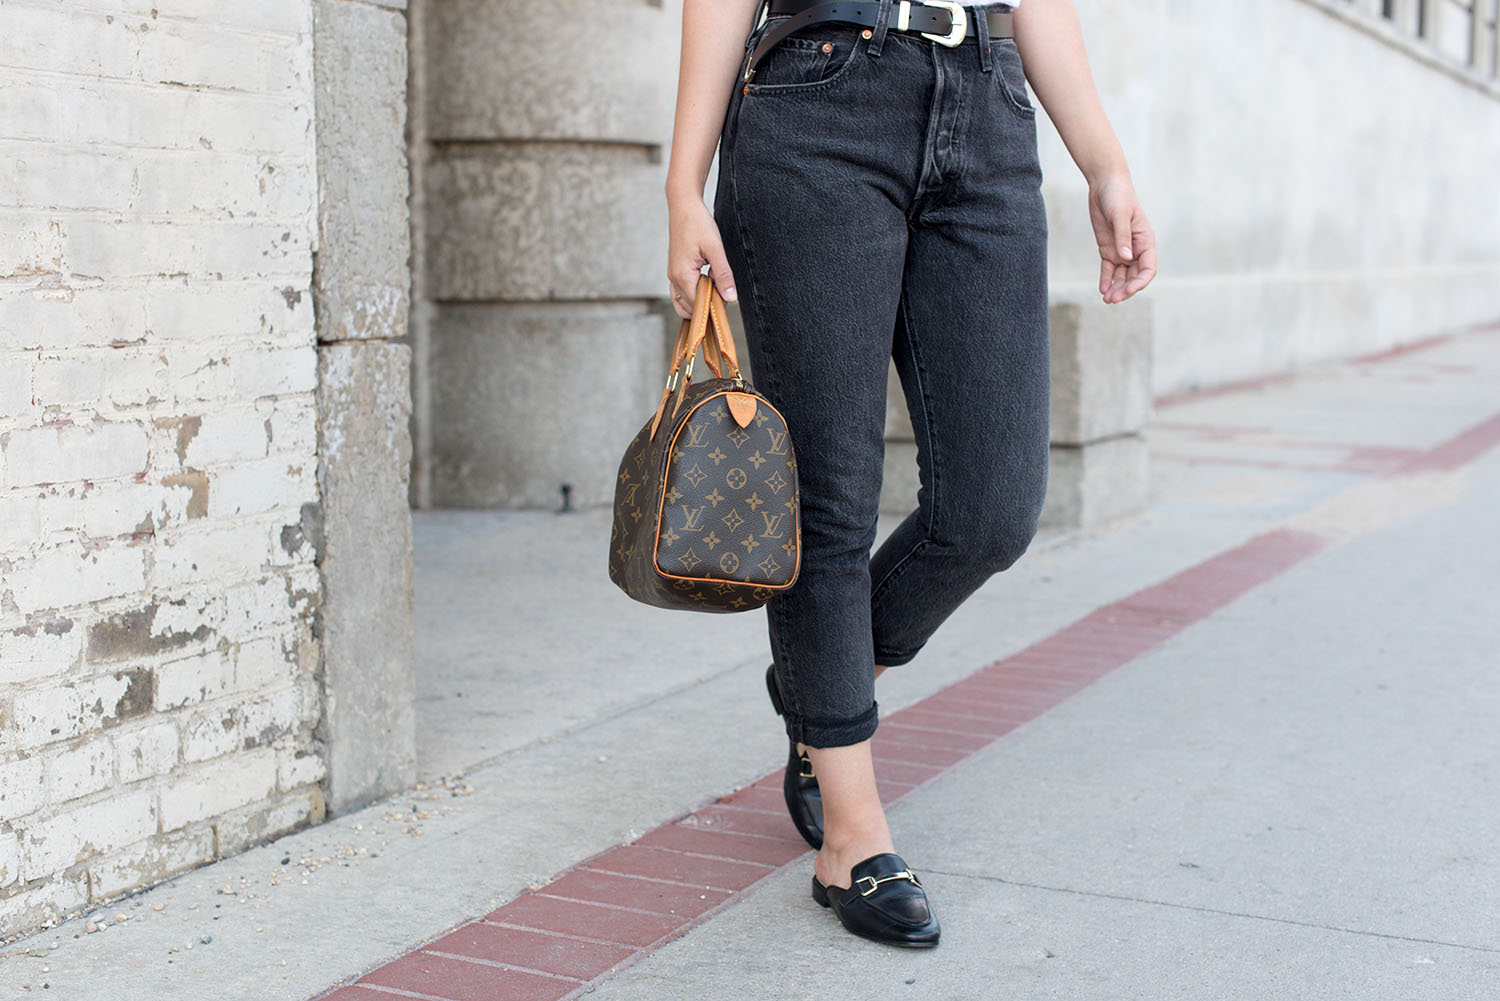 Outfit details on top Winnipeg fashion blogger Cee Fardoe of Coco & Vera, including Levi's black jeans and Jonak leather mules